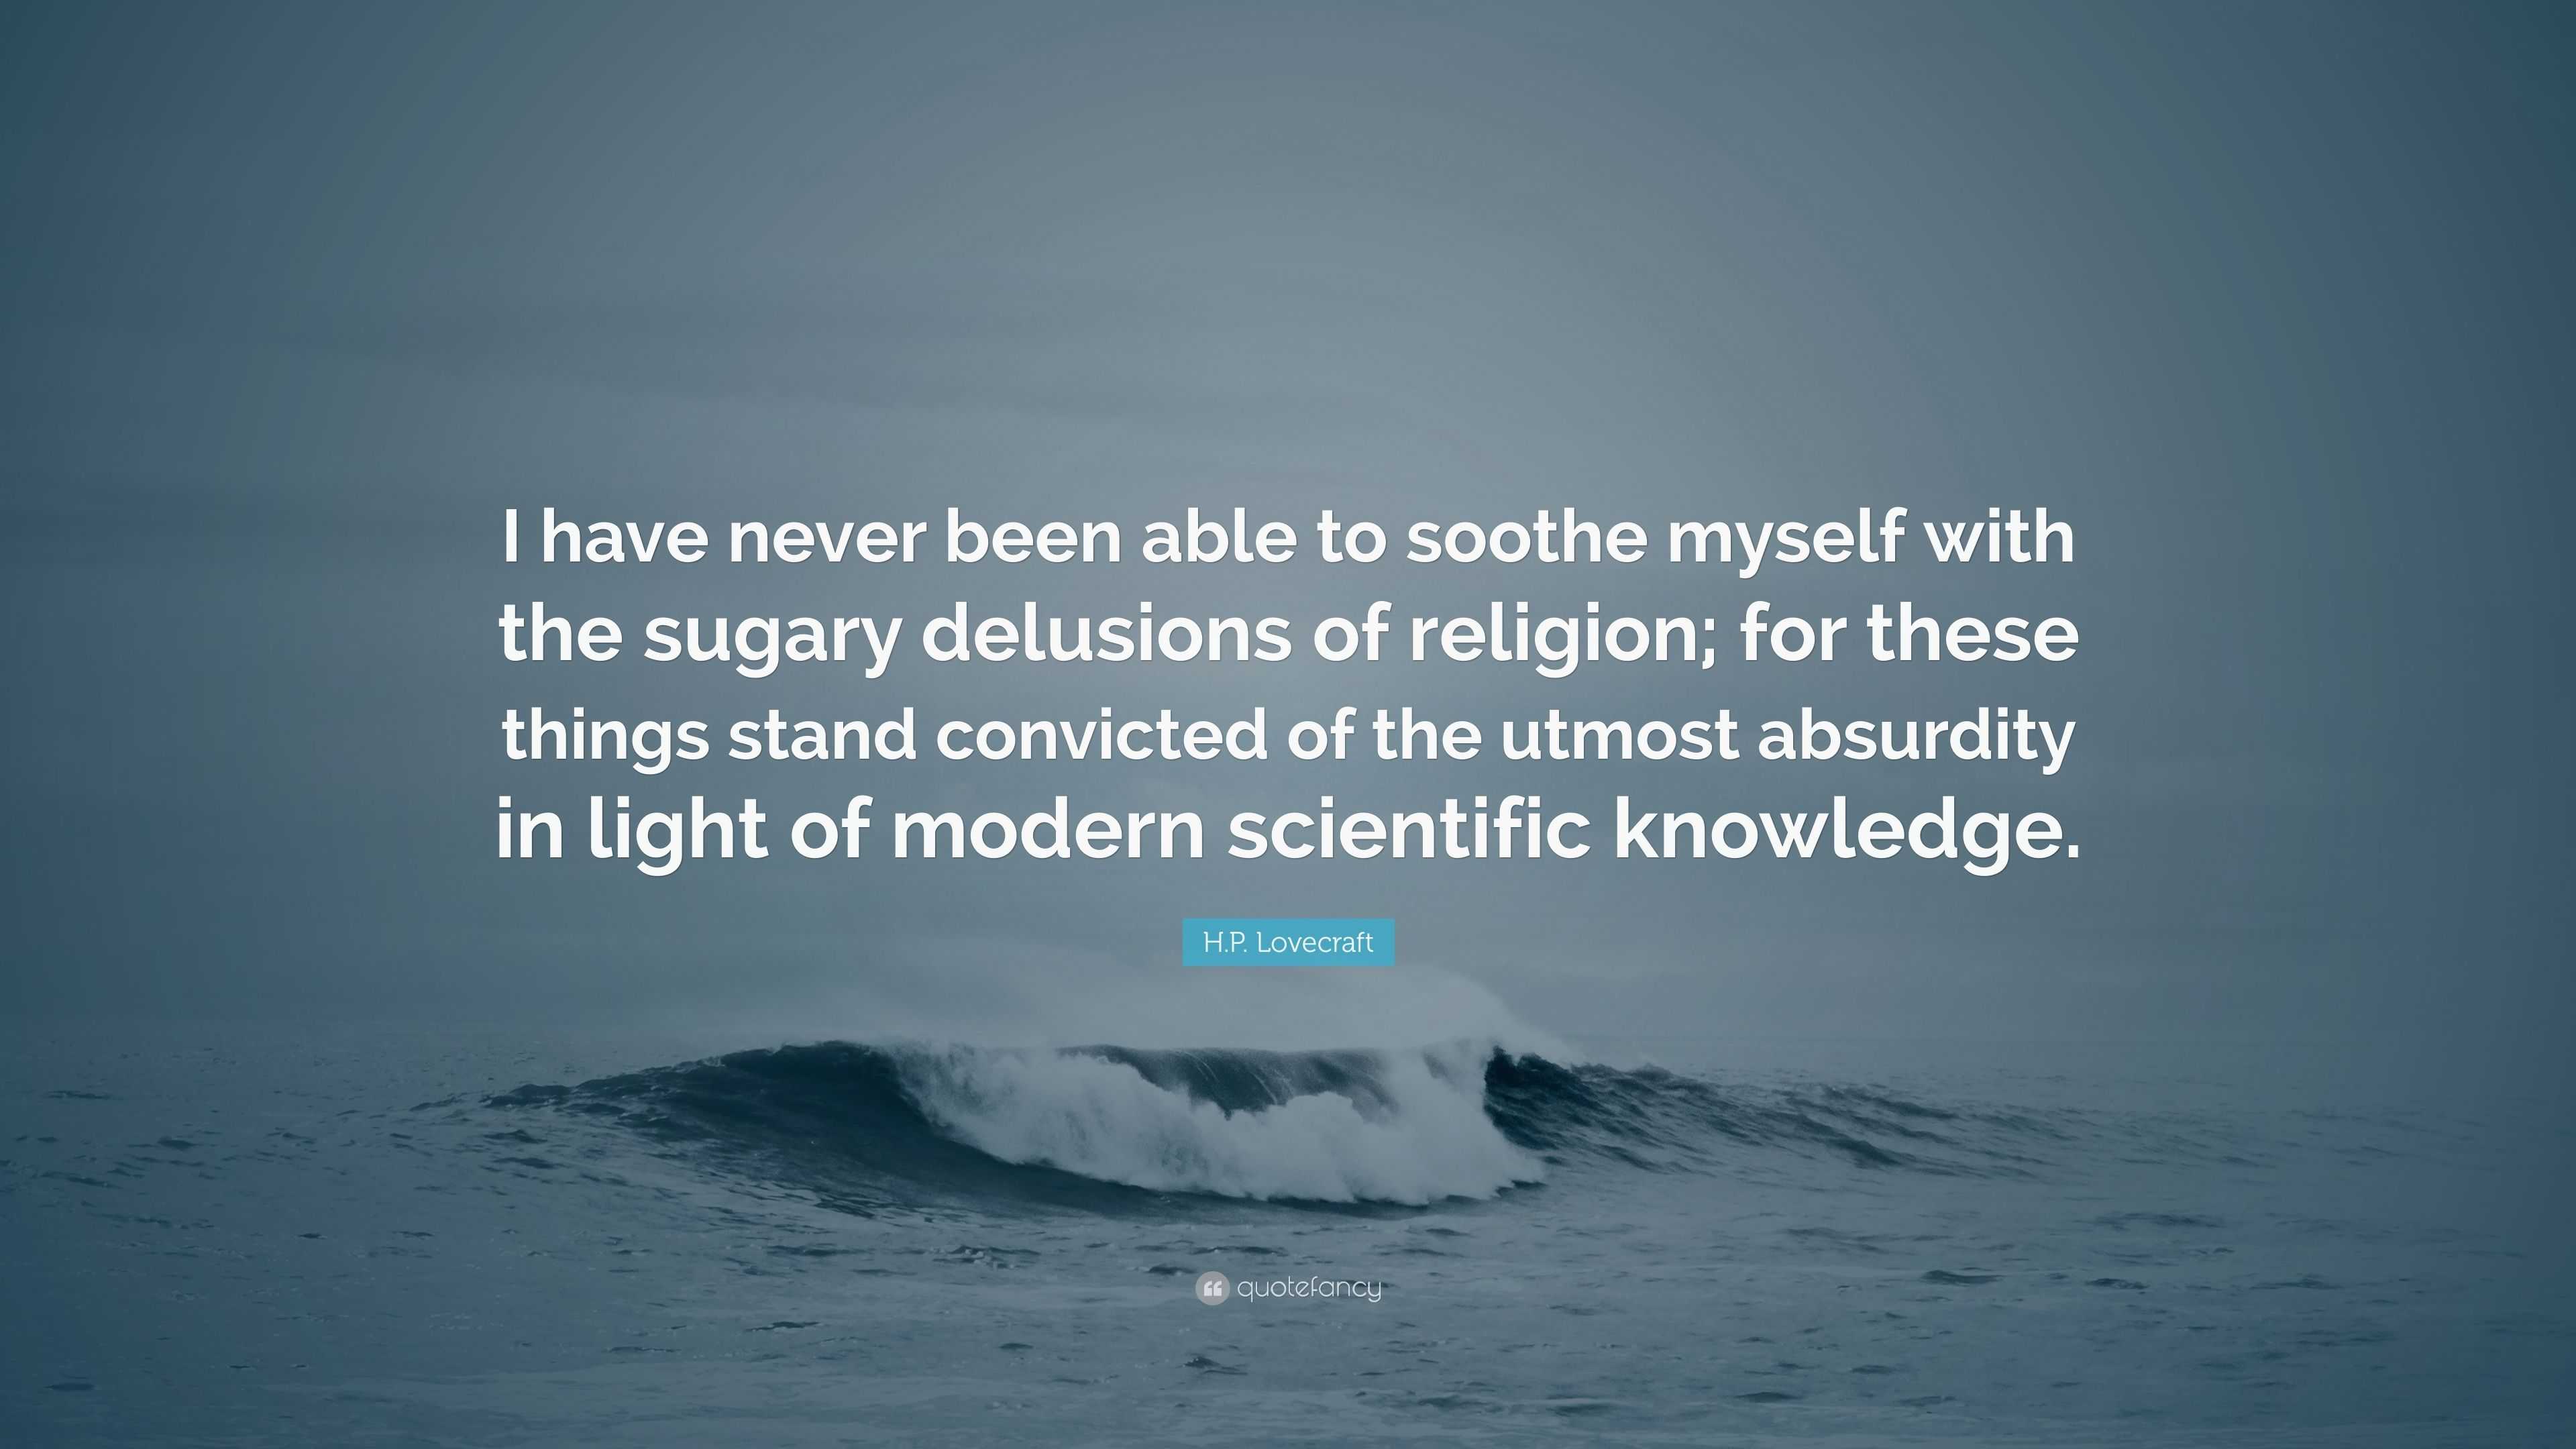 H.P. Lovecraft Quote: "I have never been able to soothe myself with the sugary delusions of ...